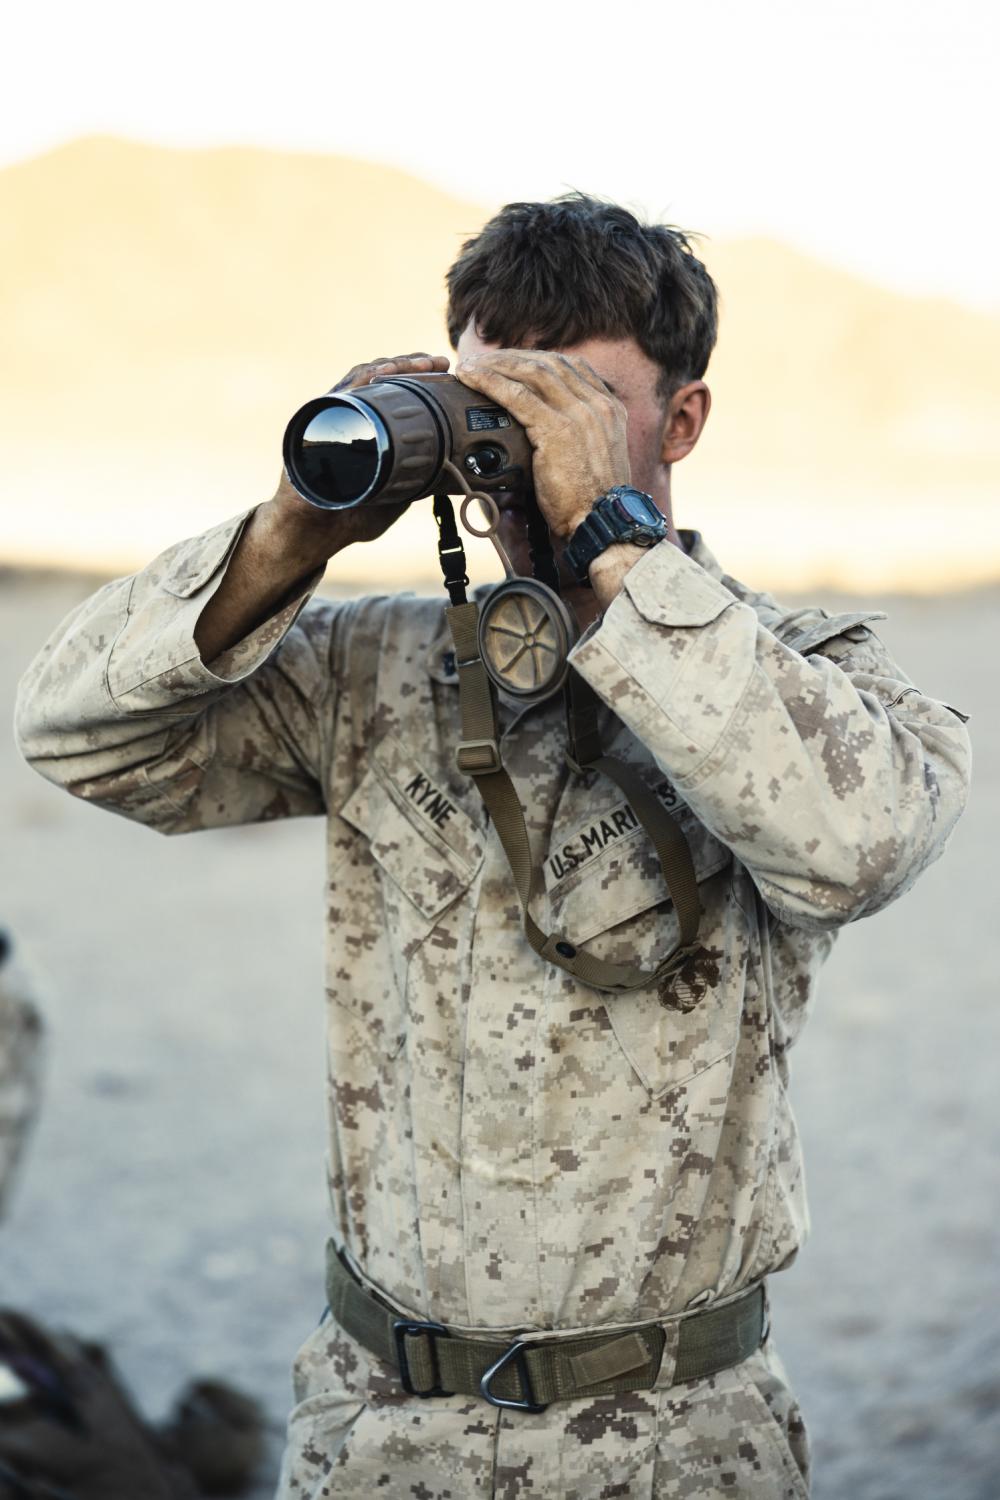 Marine Scout Snipers prepare, execute night patrolling, observation exercise during Ground Reconnaissance Course